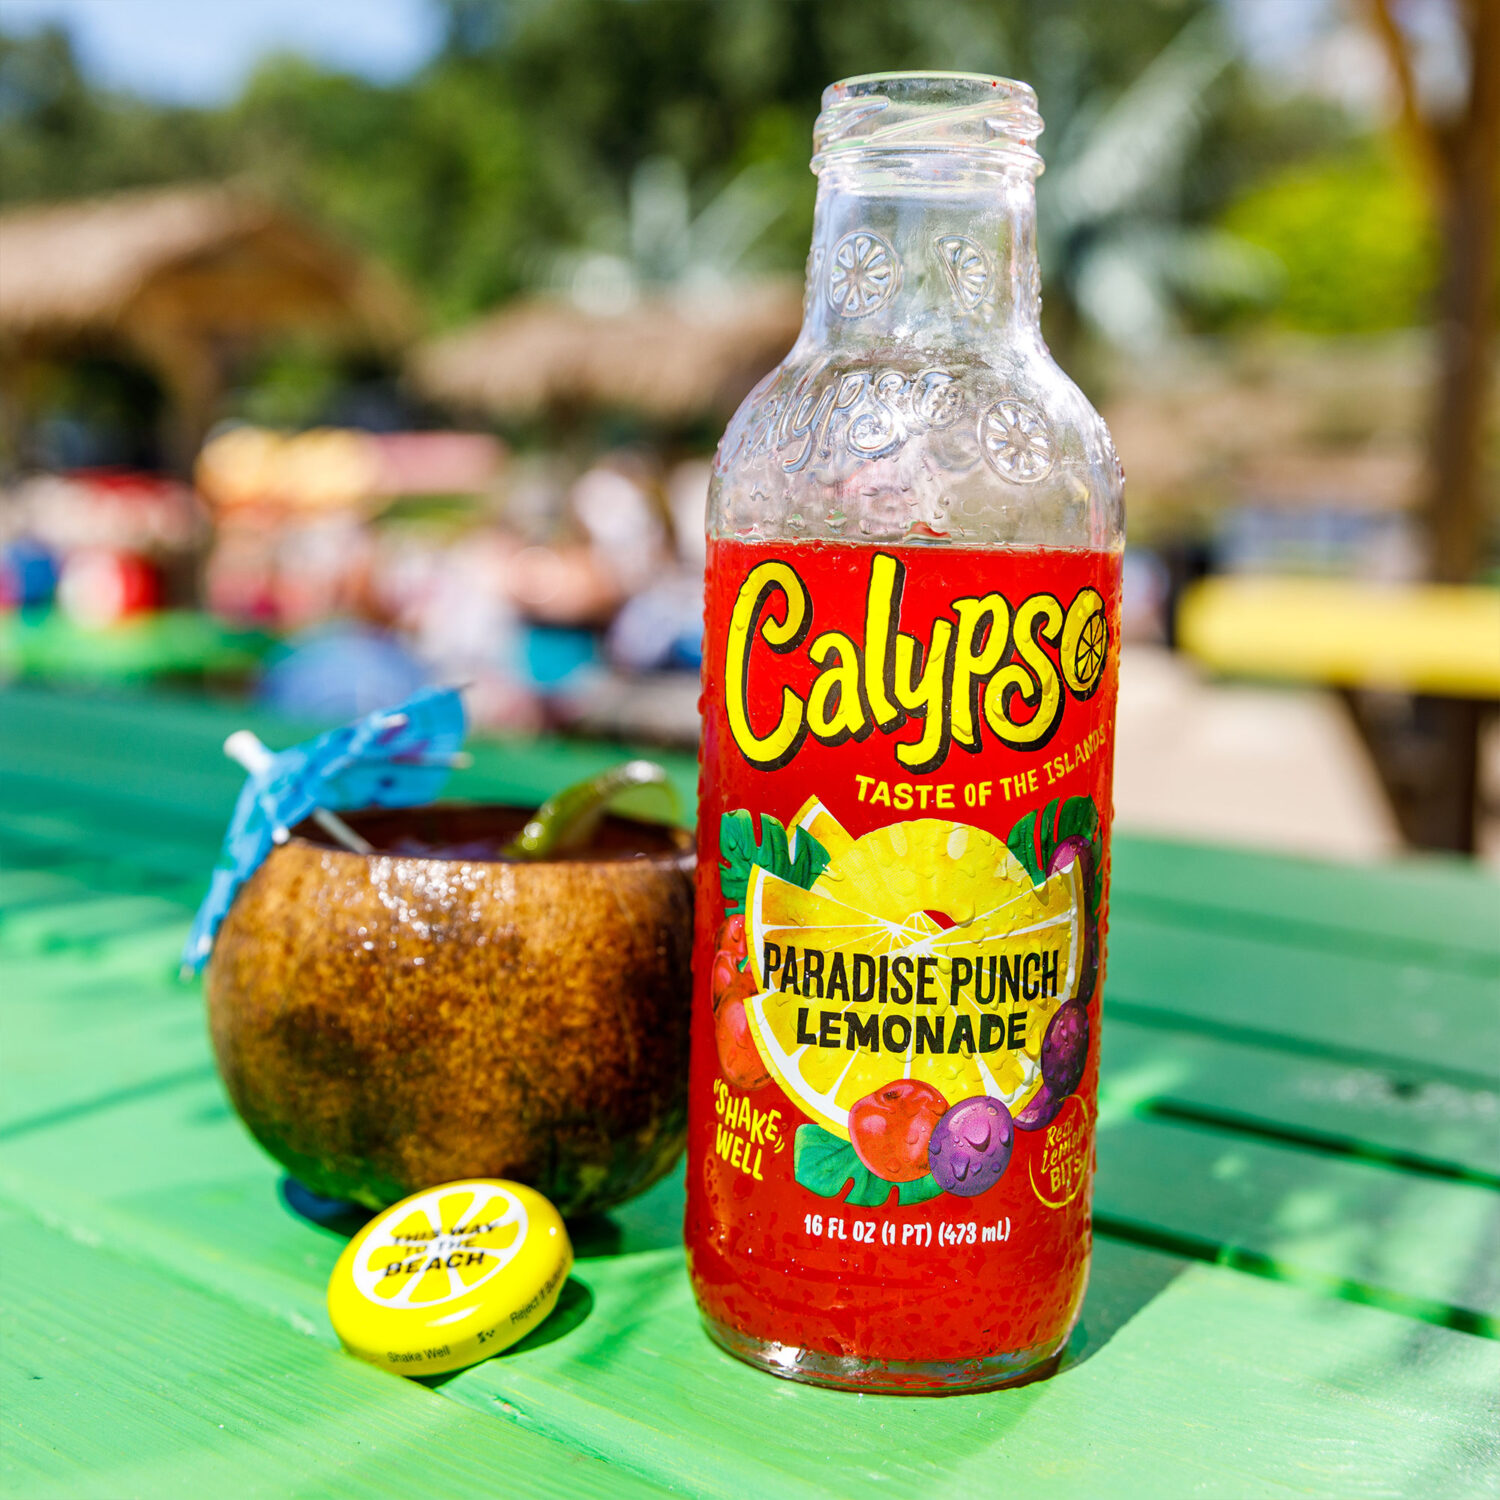 A bottle of Calypso Paradise Punch Lemonade sits on a picnic table next to a coconut.